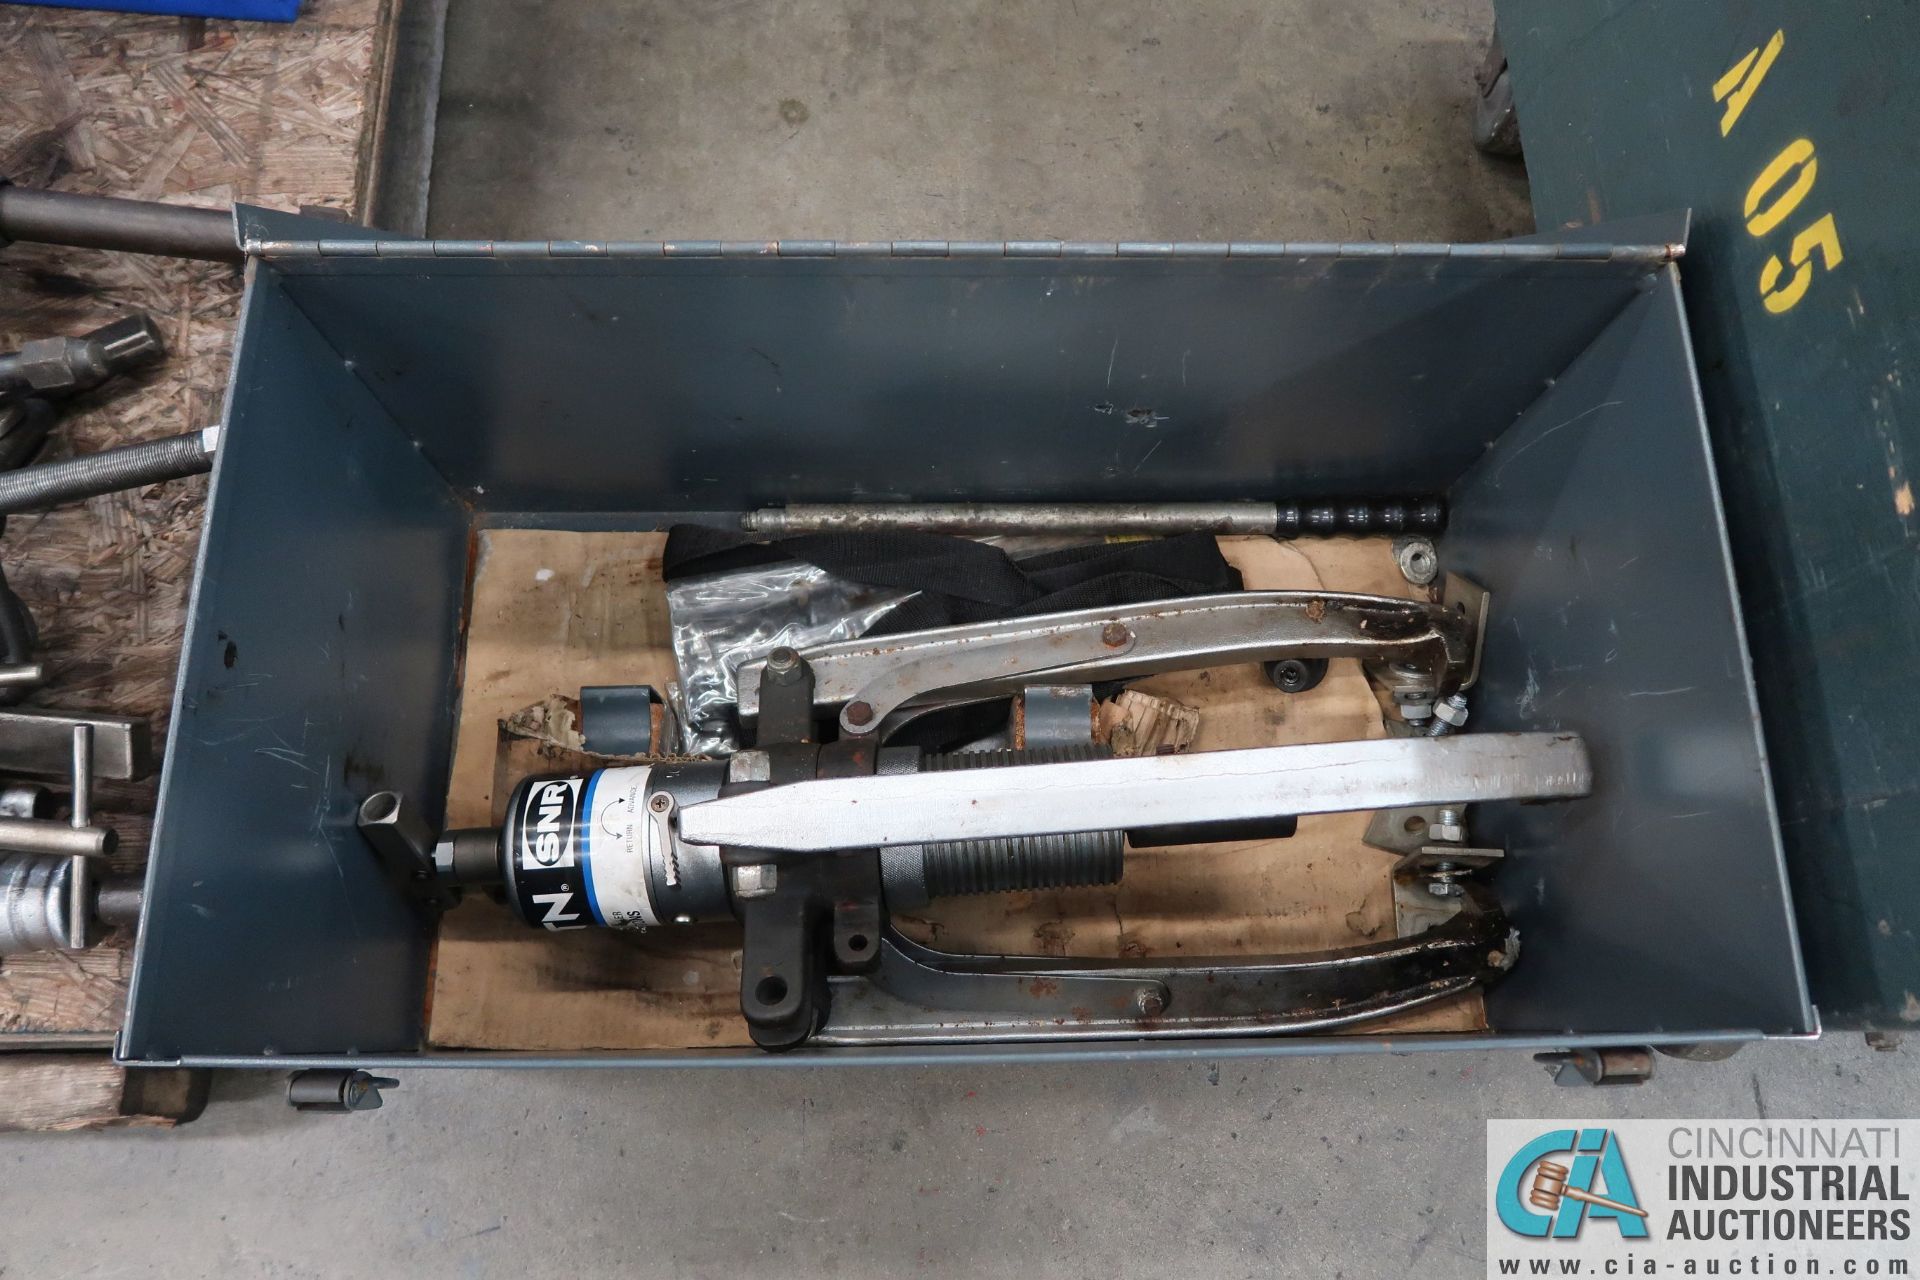 (LOT) 20 TON NTN SELF CENTERING HYDRAULIC PULLER, (2) 10 TON PROTO SET PULLERS - Image 3 of 3